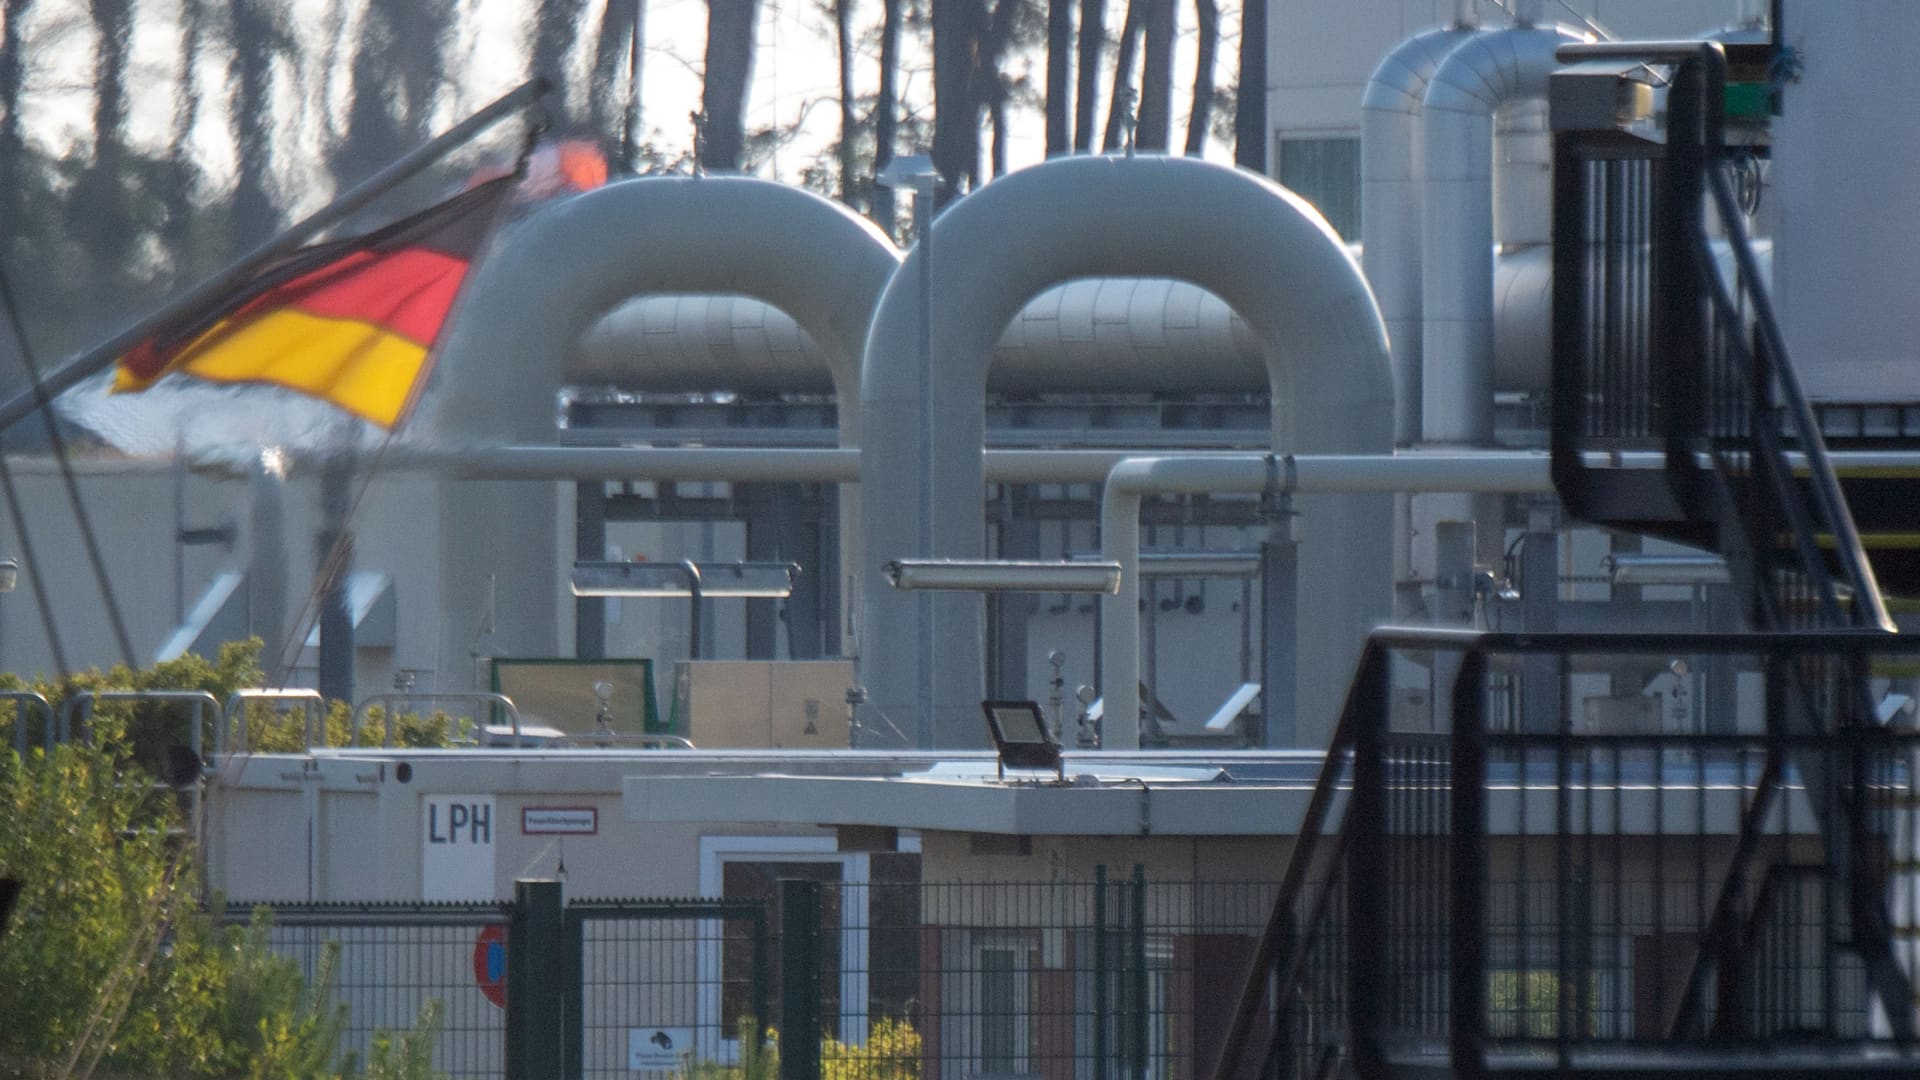 Pipe systems and shut-off devices at the gas receiving station of the Nord Stream 1 Baltic Sea pipeline and the transfer station of the OPAL long-distance gas pipeline (Ostsee-Pipeline-Anbindungsleitung - Baltic Sea Pipeline Link) are seen in the industrial area of Lubmin.